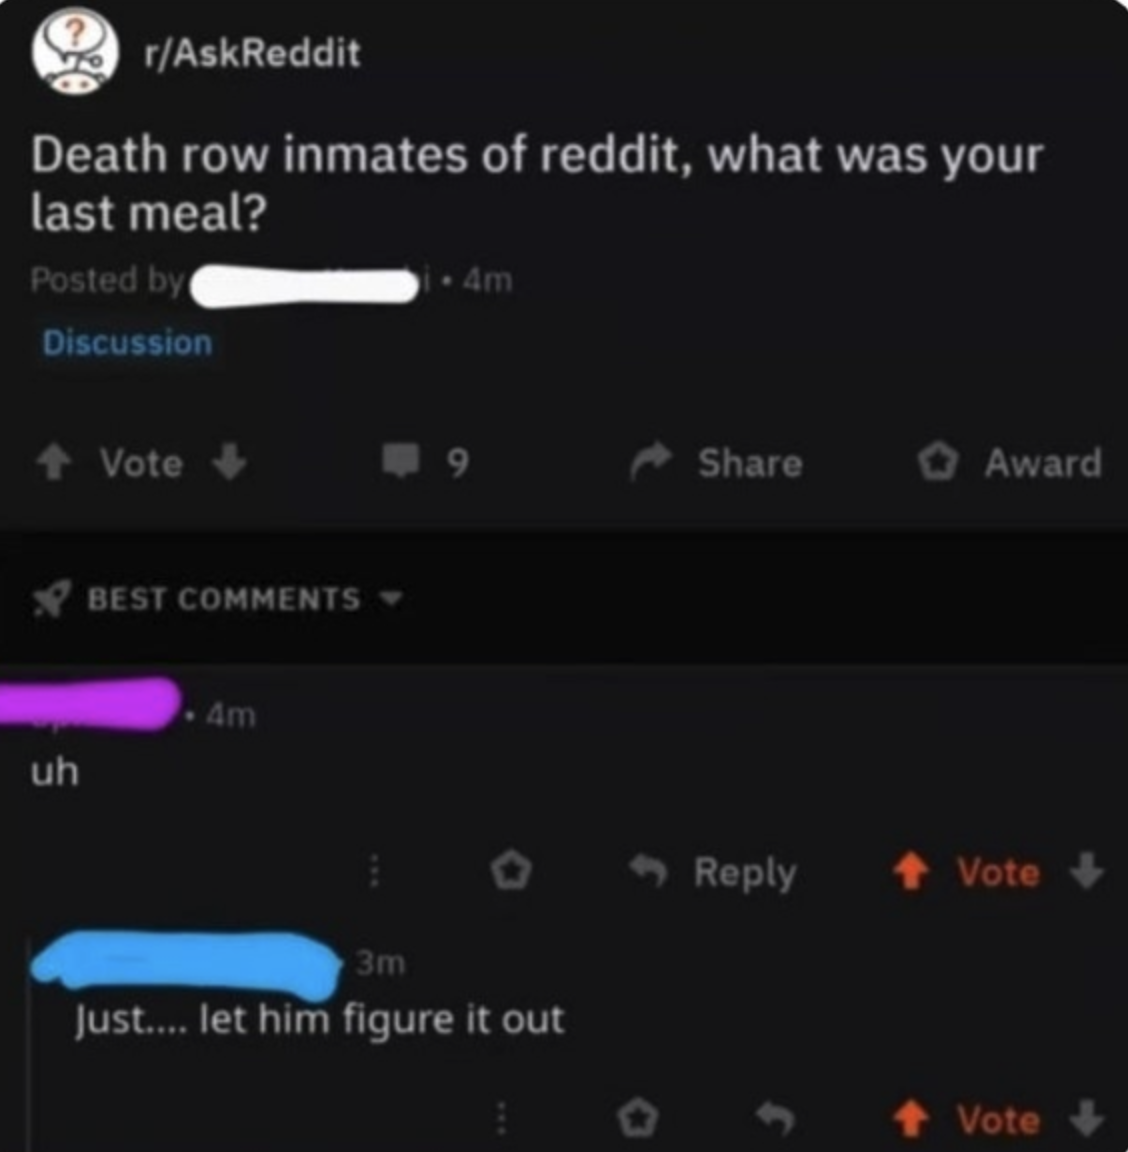 reddit post of someone asking what death row inmates of reddit ate for their last meal